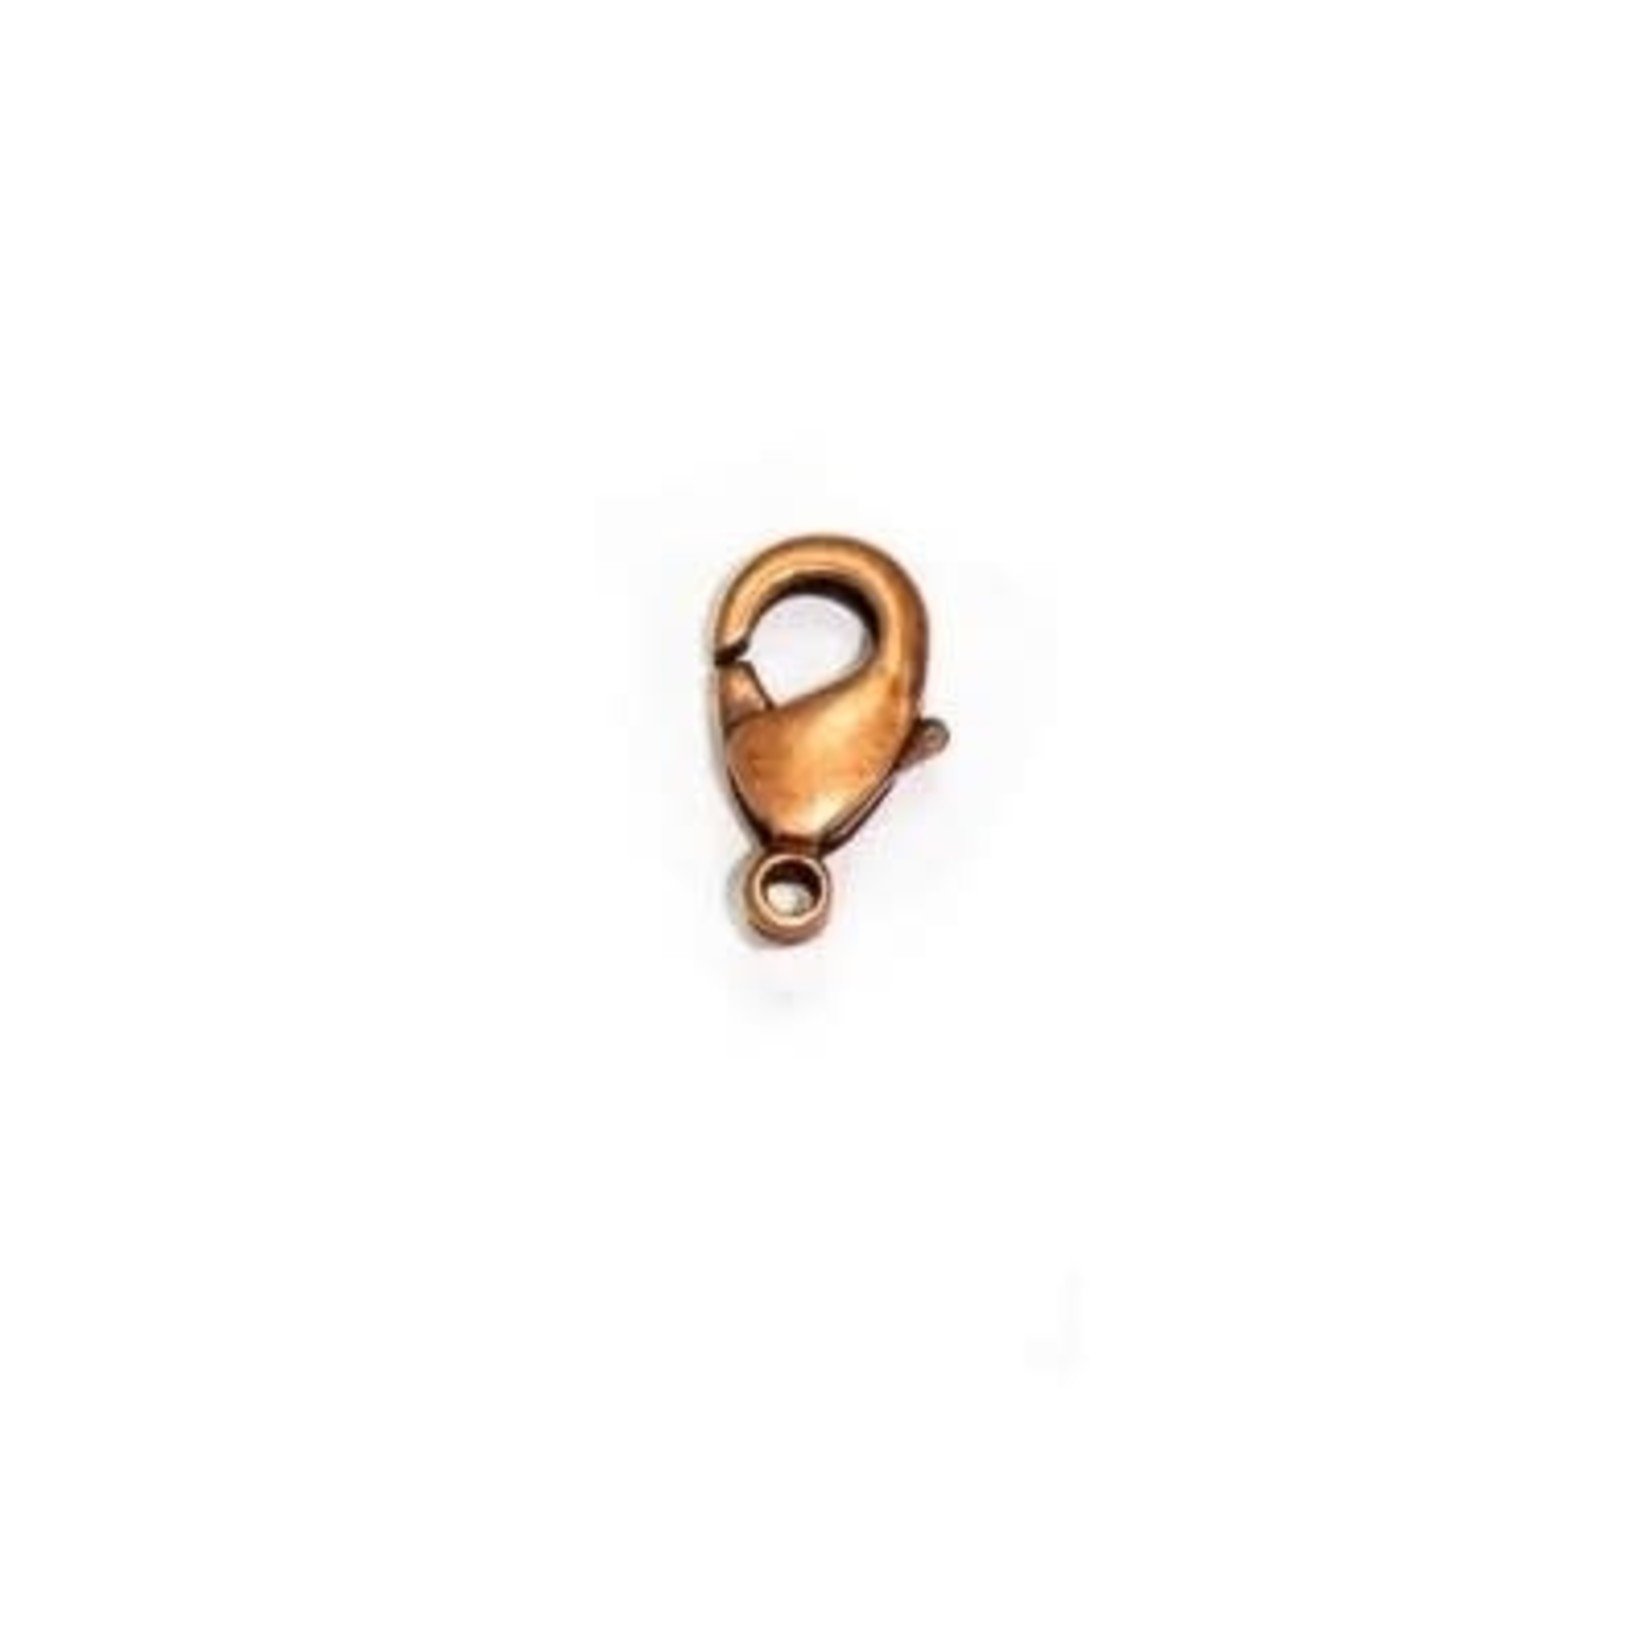 Antique Copper Plated Lobster Clasp  9x5mm Nickel-Free